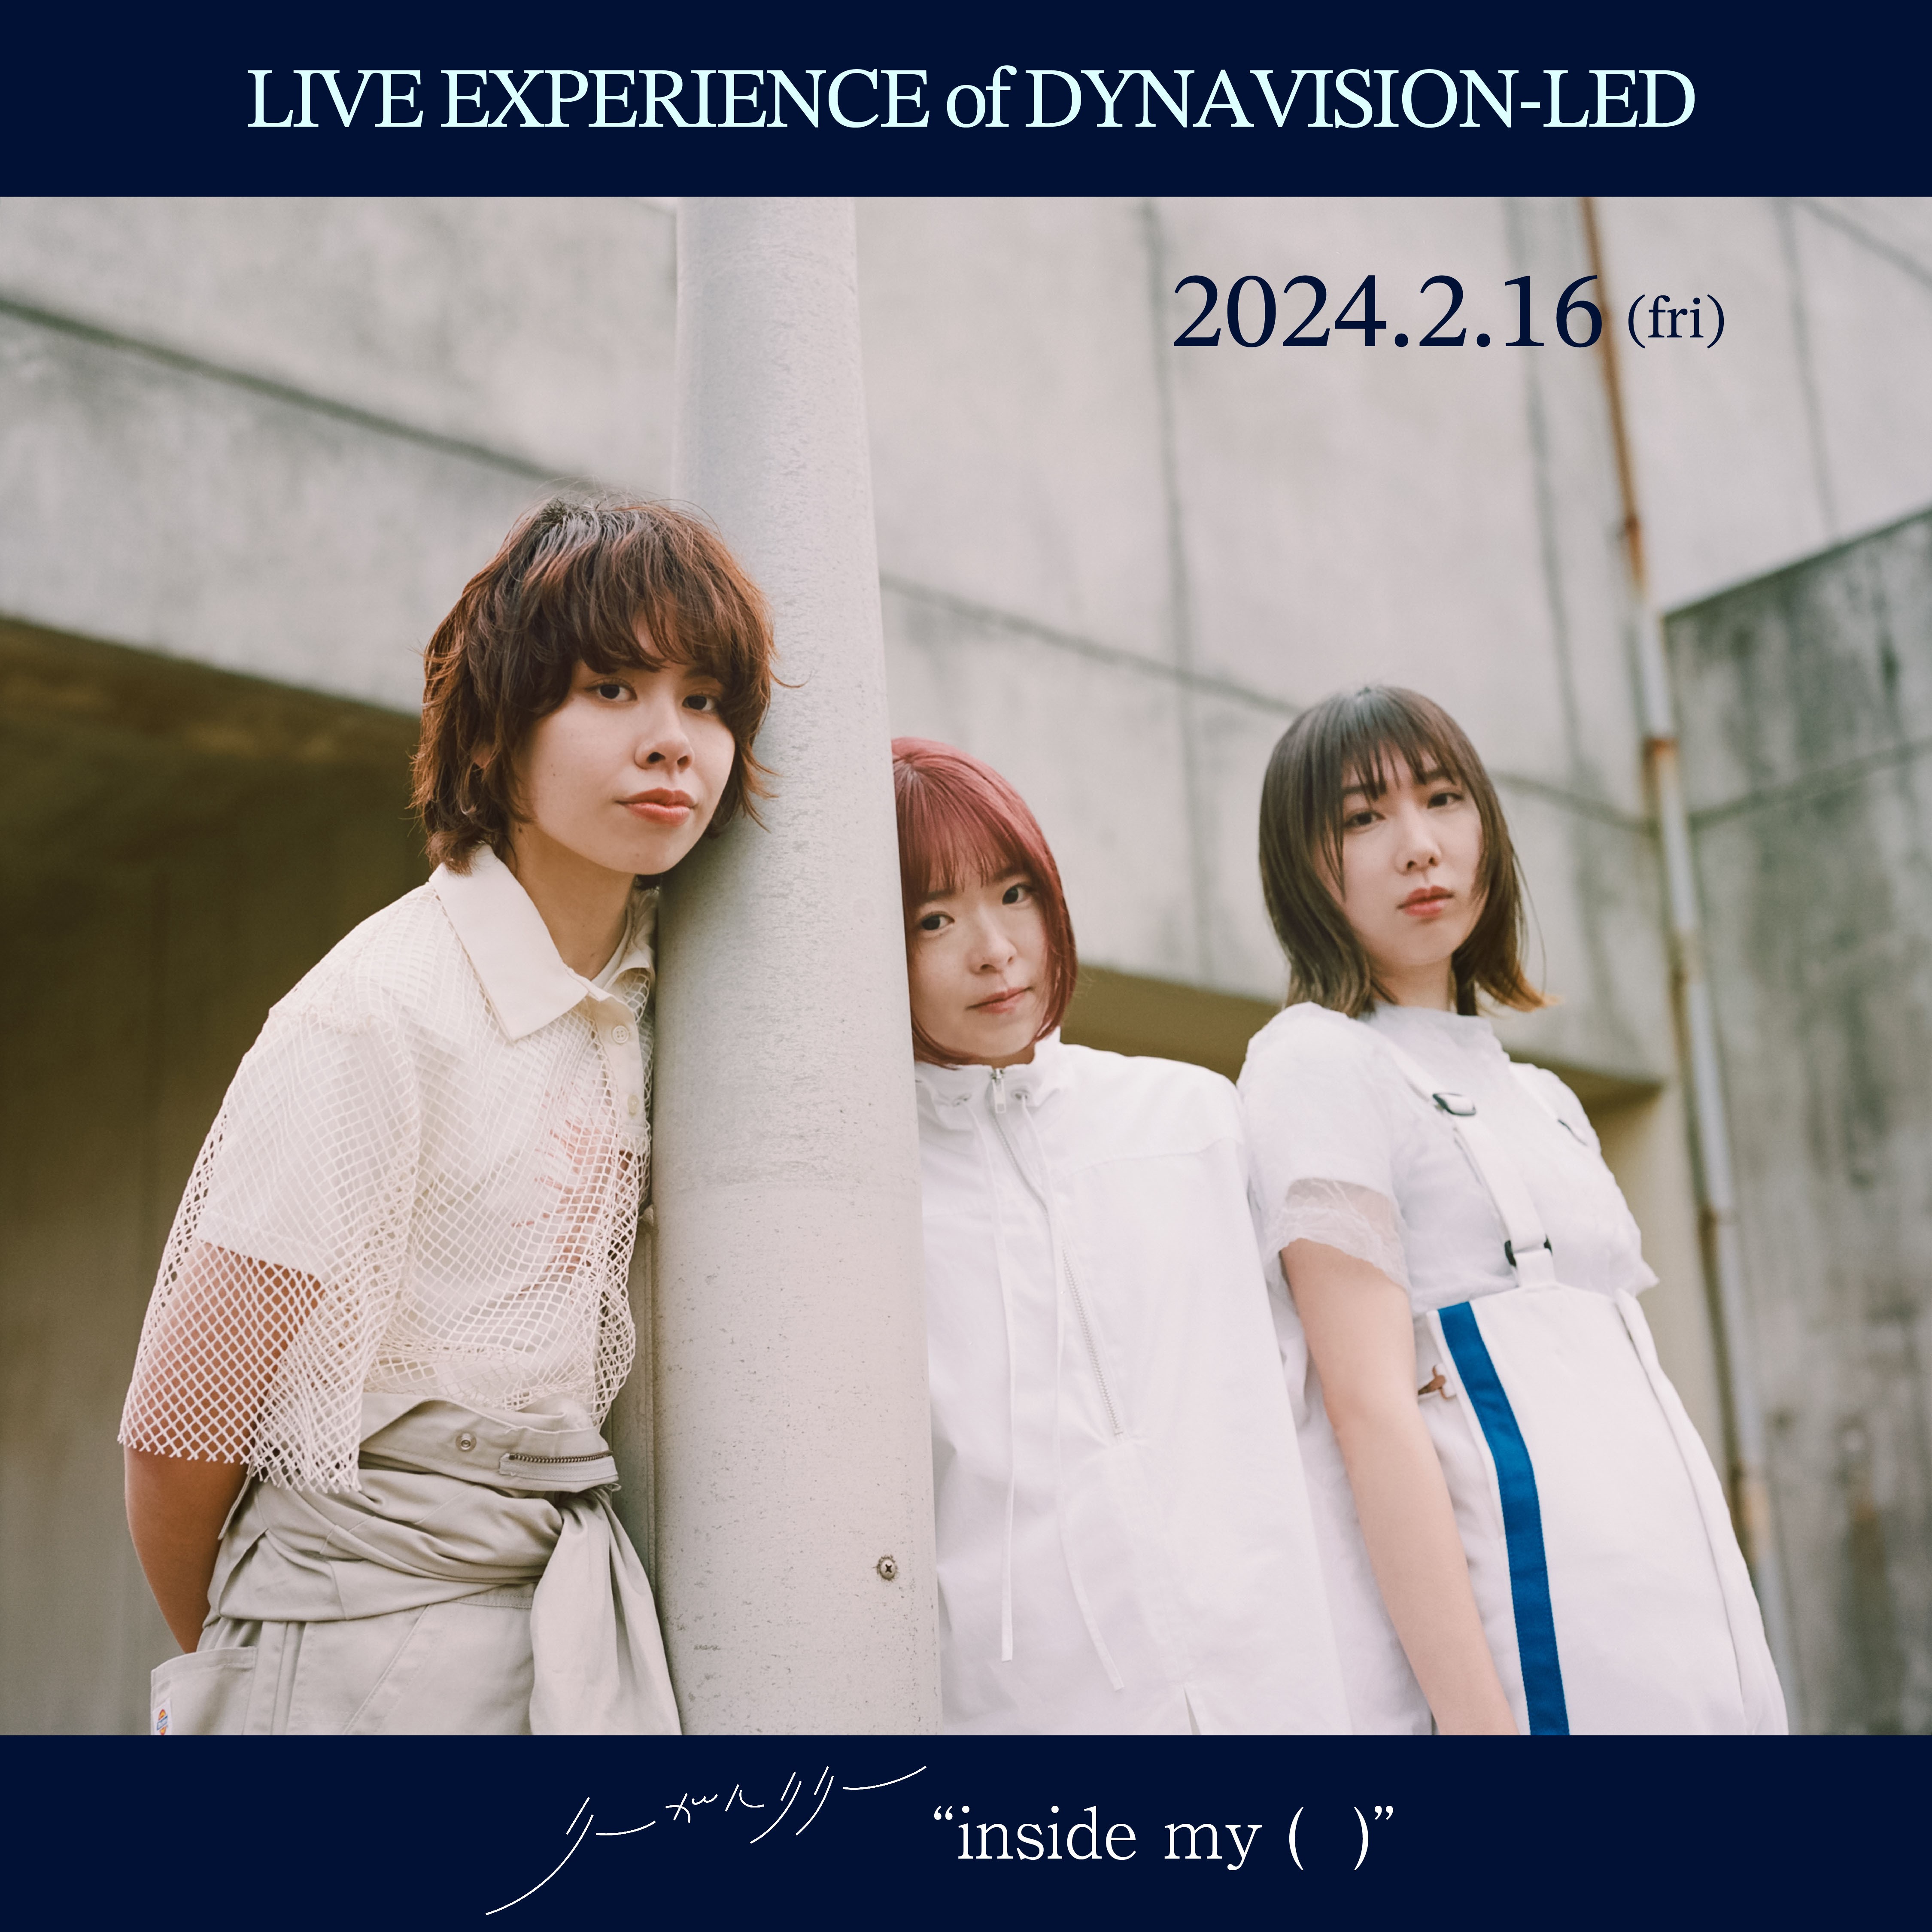 LIVE EXPERIENCE of DYNAVISION-LED “inside my ( )”